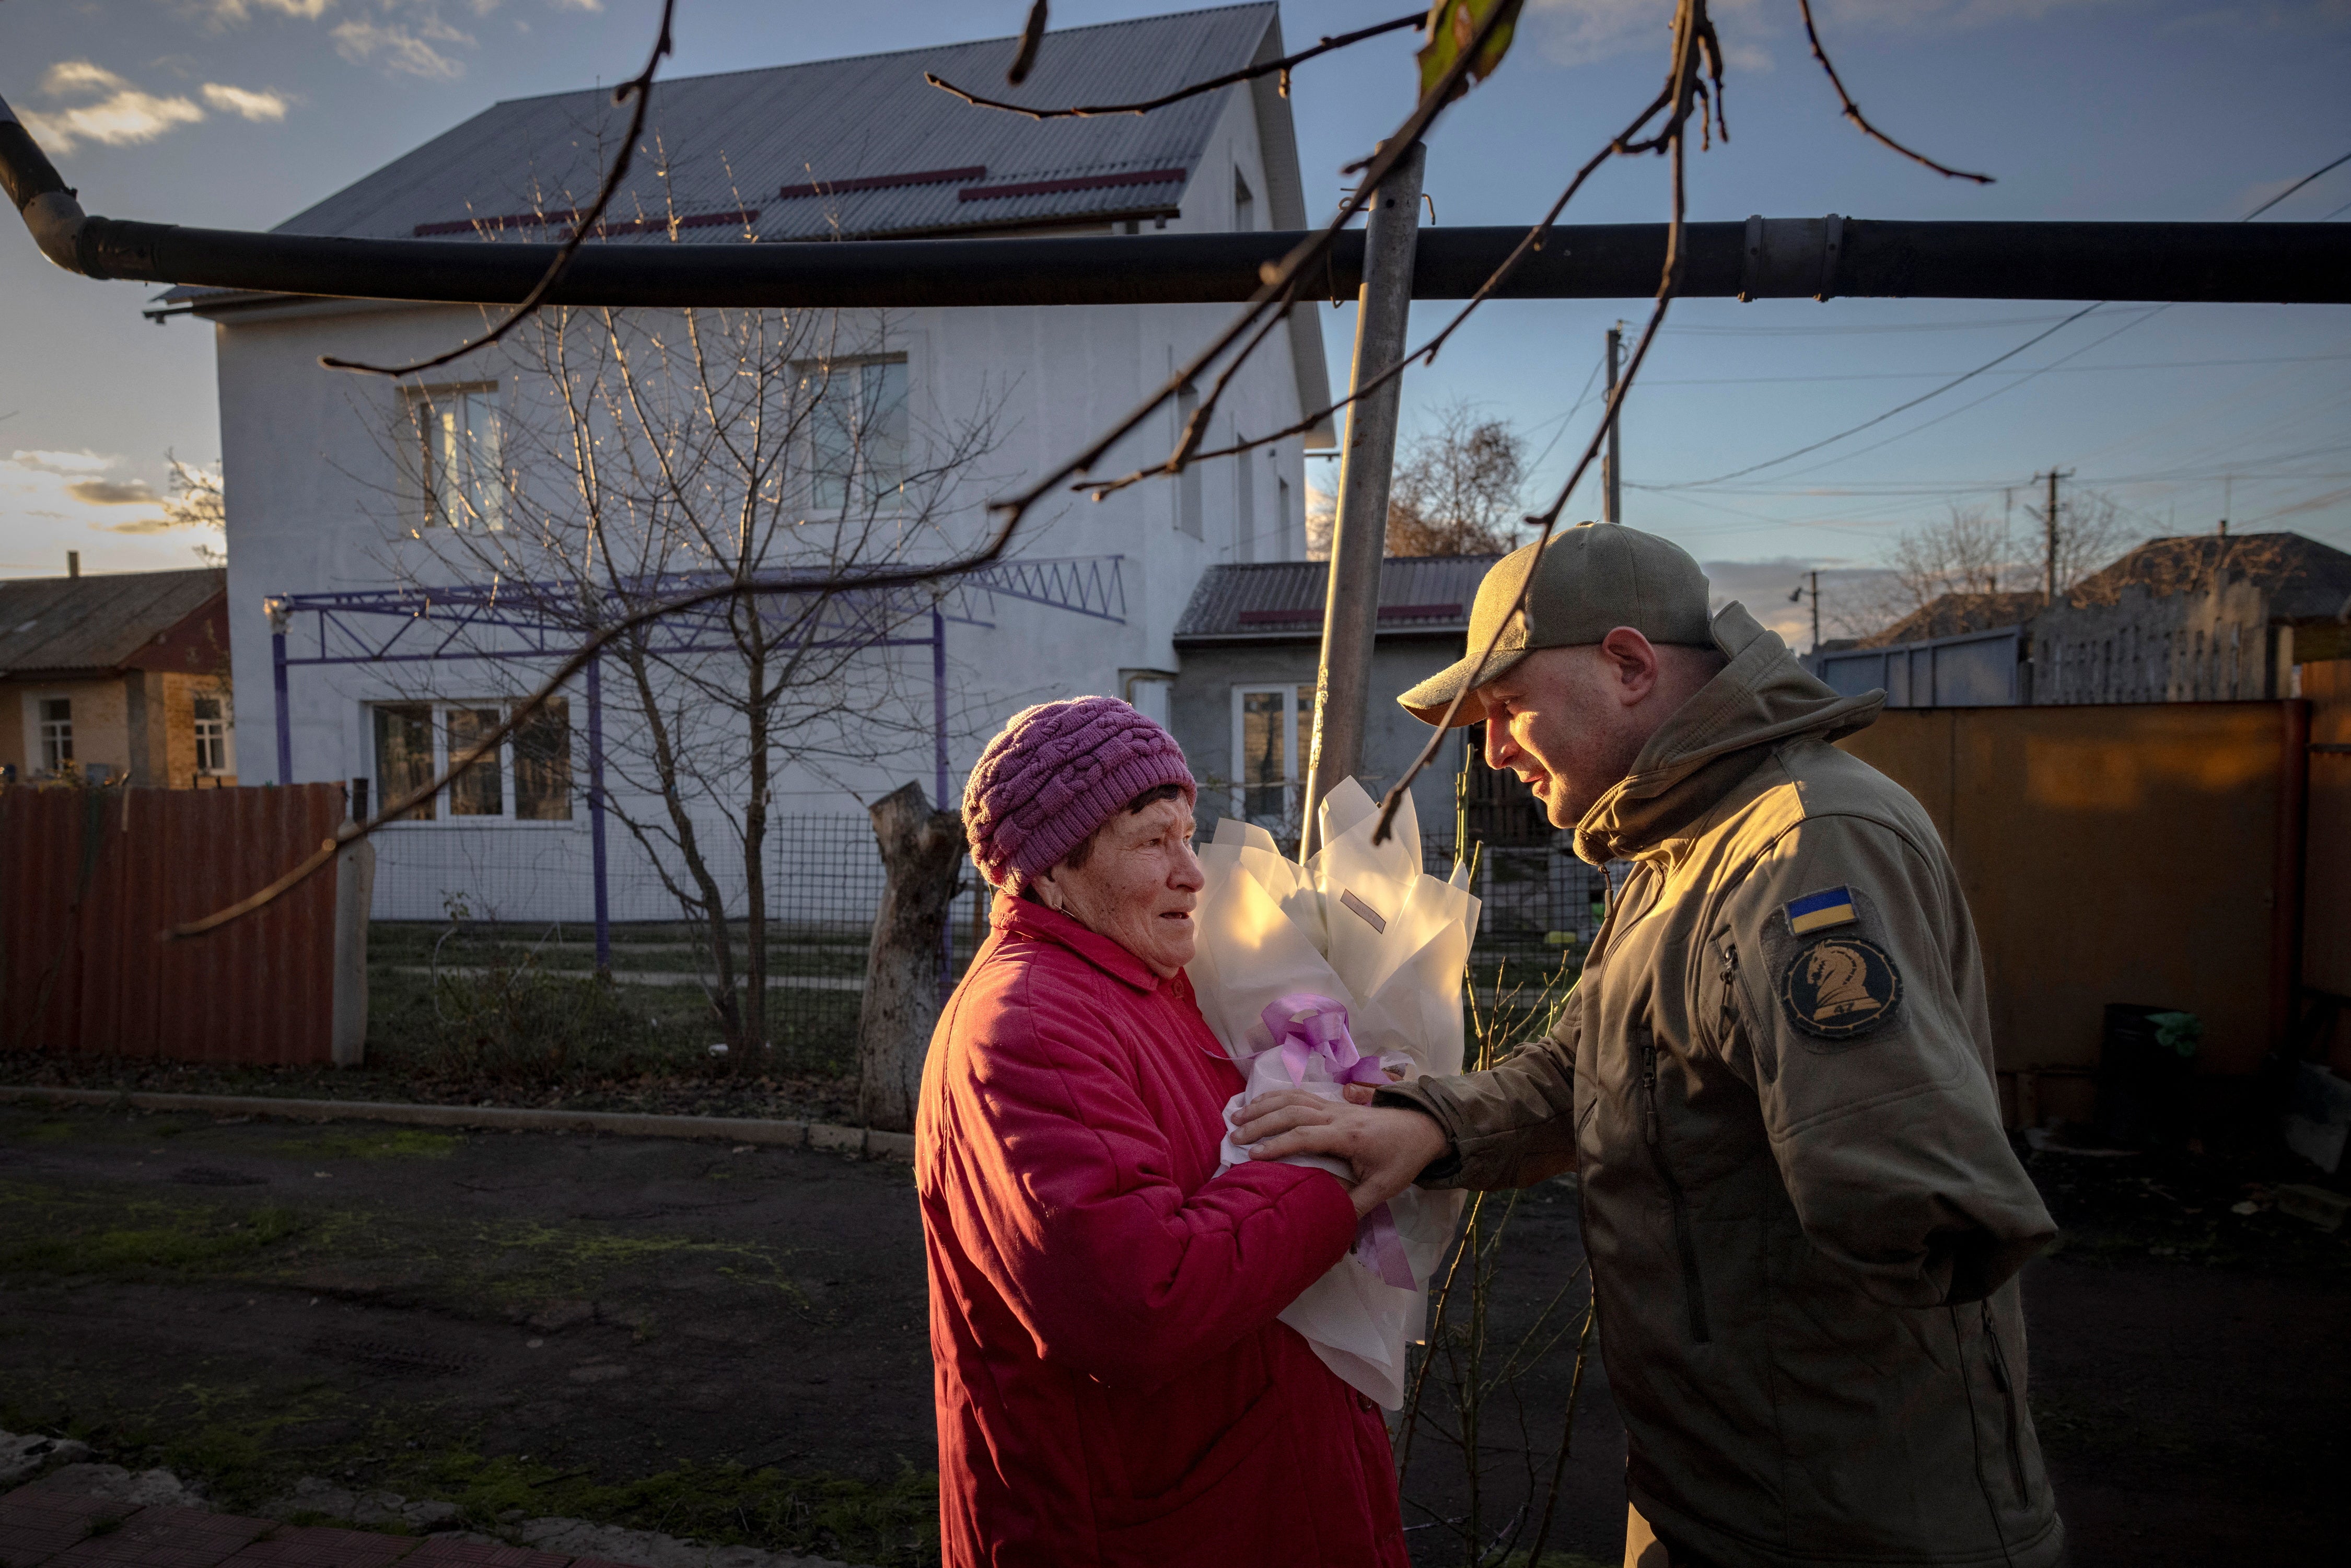 Oleksandr Revtiukh, 33, a Ukrainian serviceman who lost his left arm and most of his left leg in multiple mine blasts in 2023, greets his grandmother in his hometown during his first visit after his injury